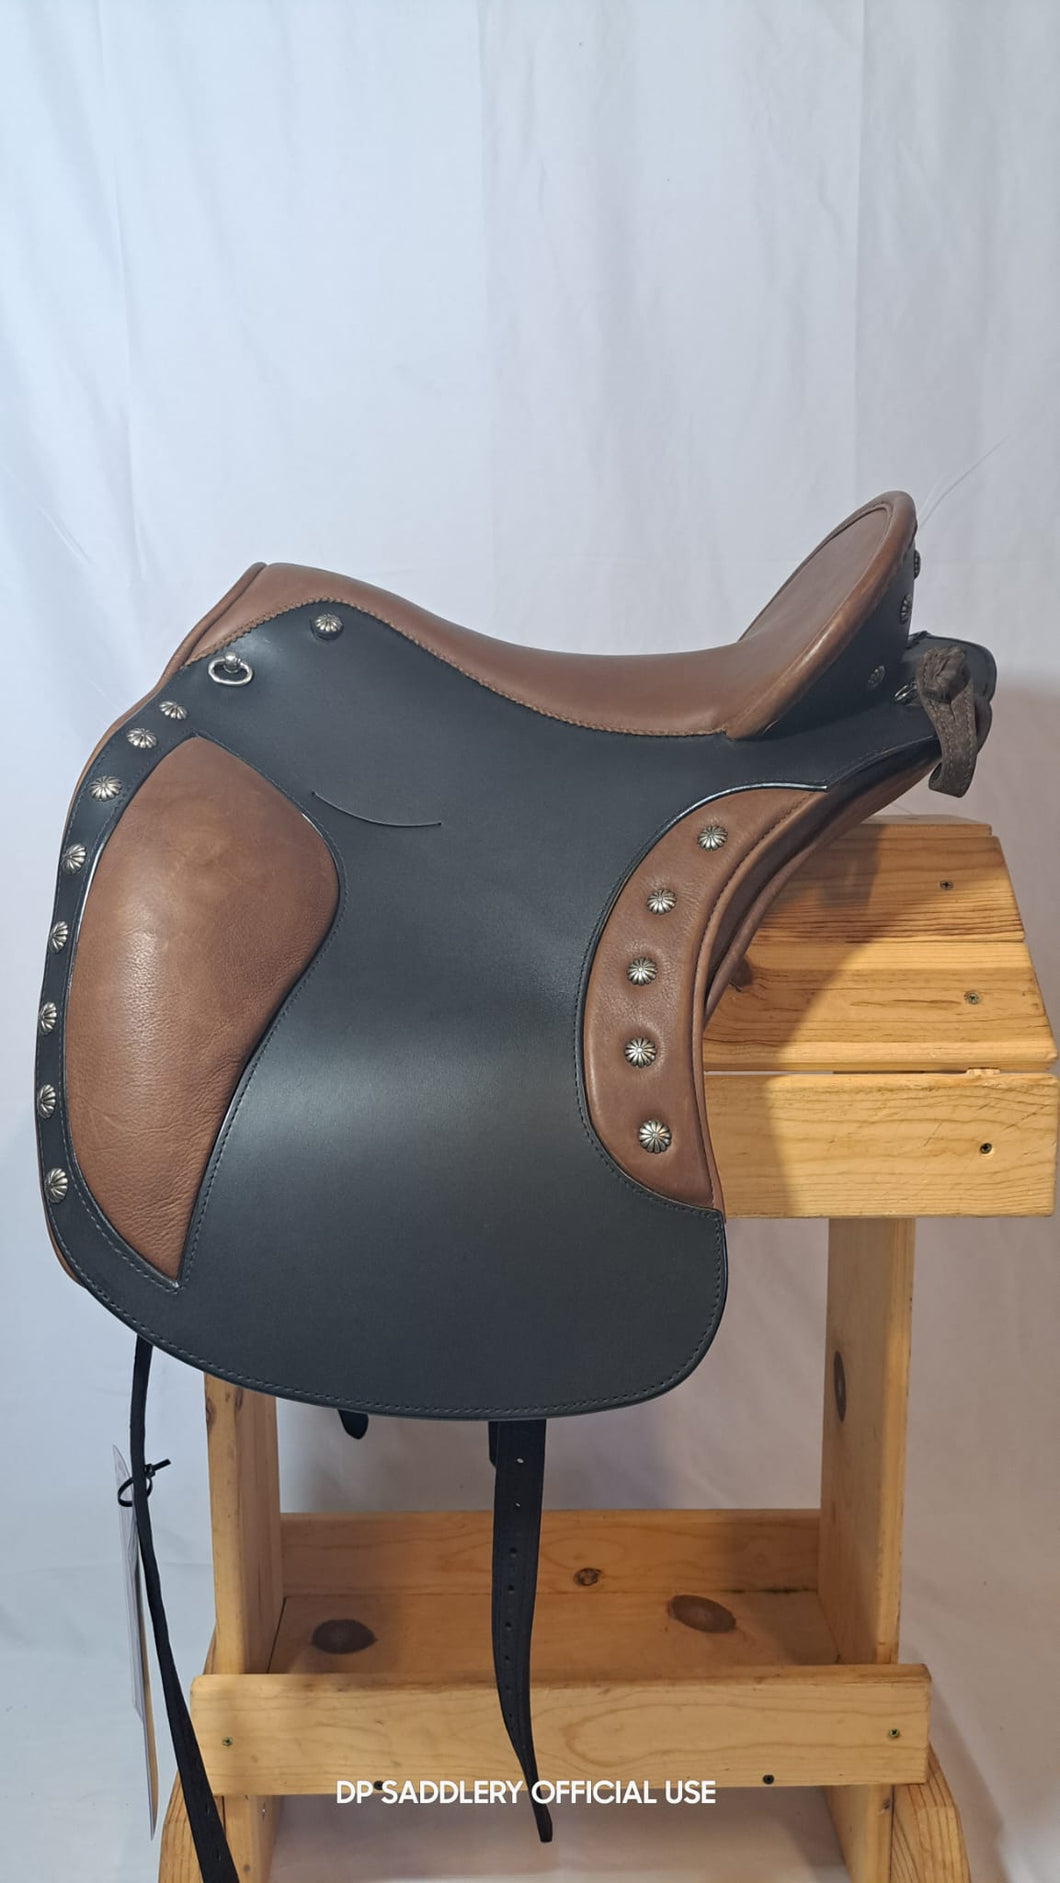 dp saddlery el campo, side view on a wooden saddle rack, white background